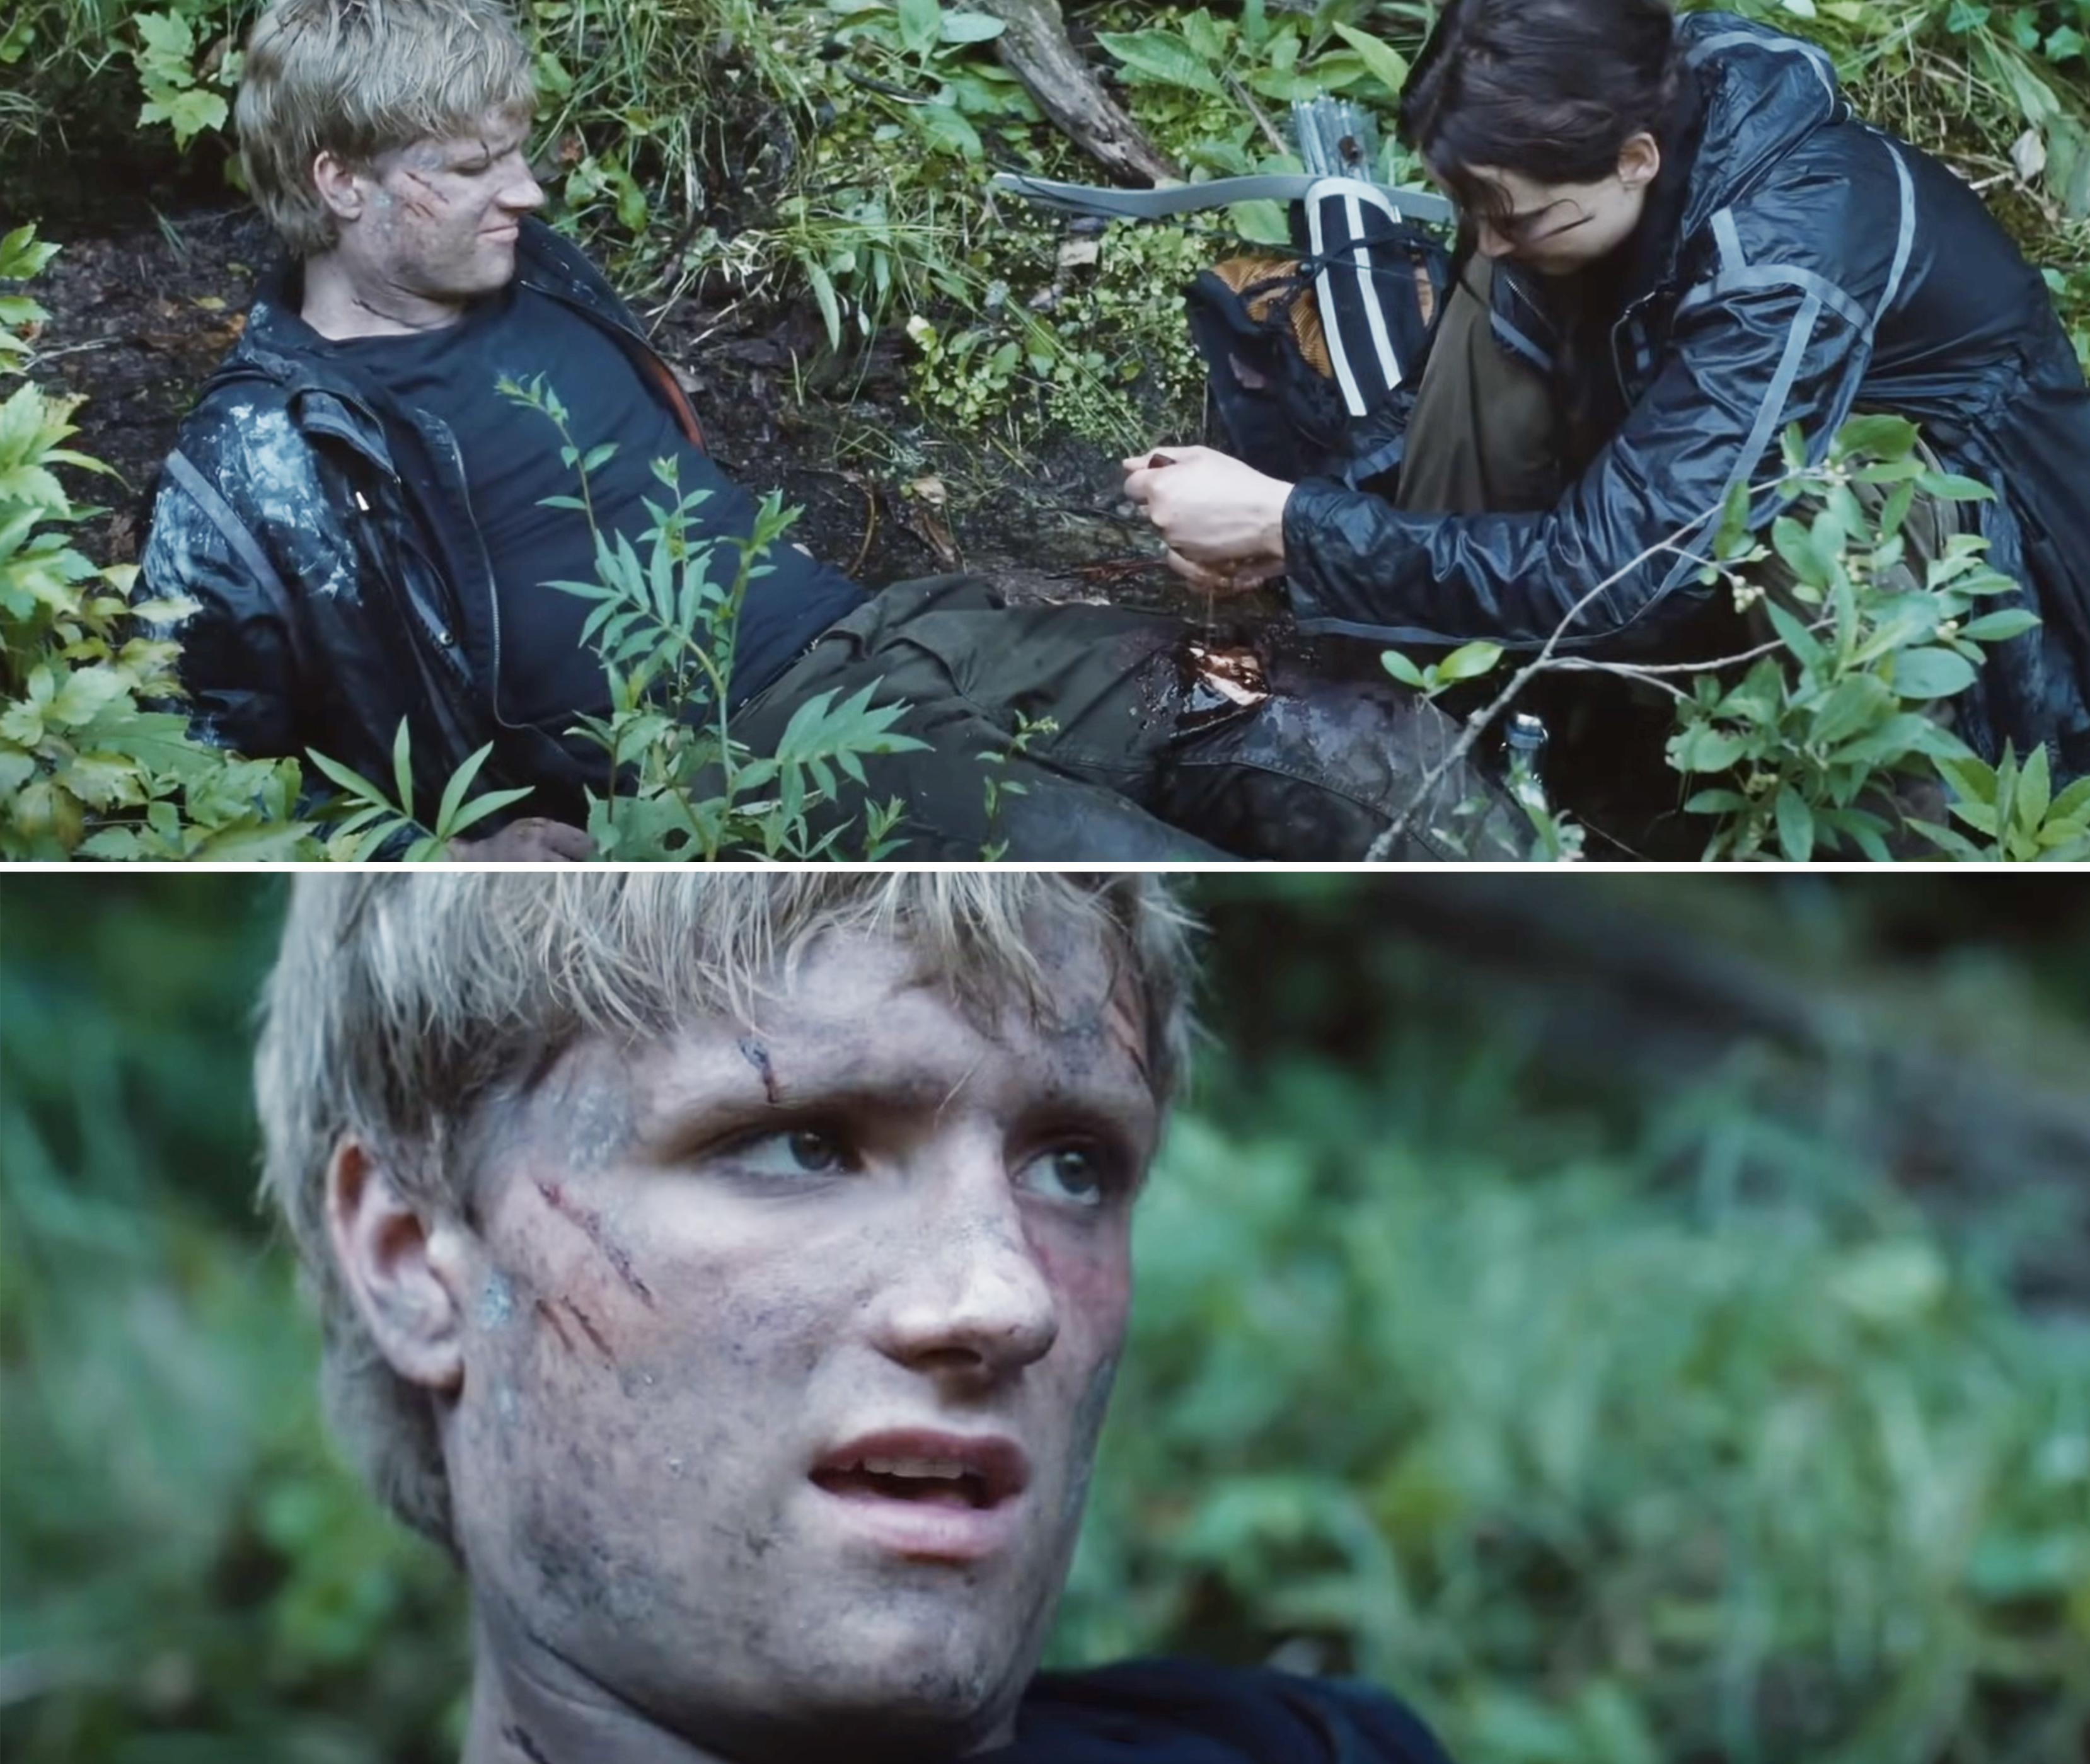 Peeta in the dirt from &quot;The Hunger Games&quot;